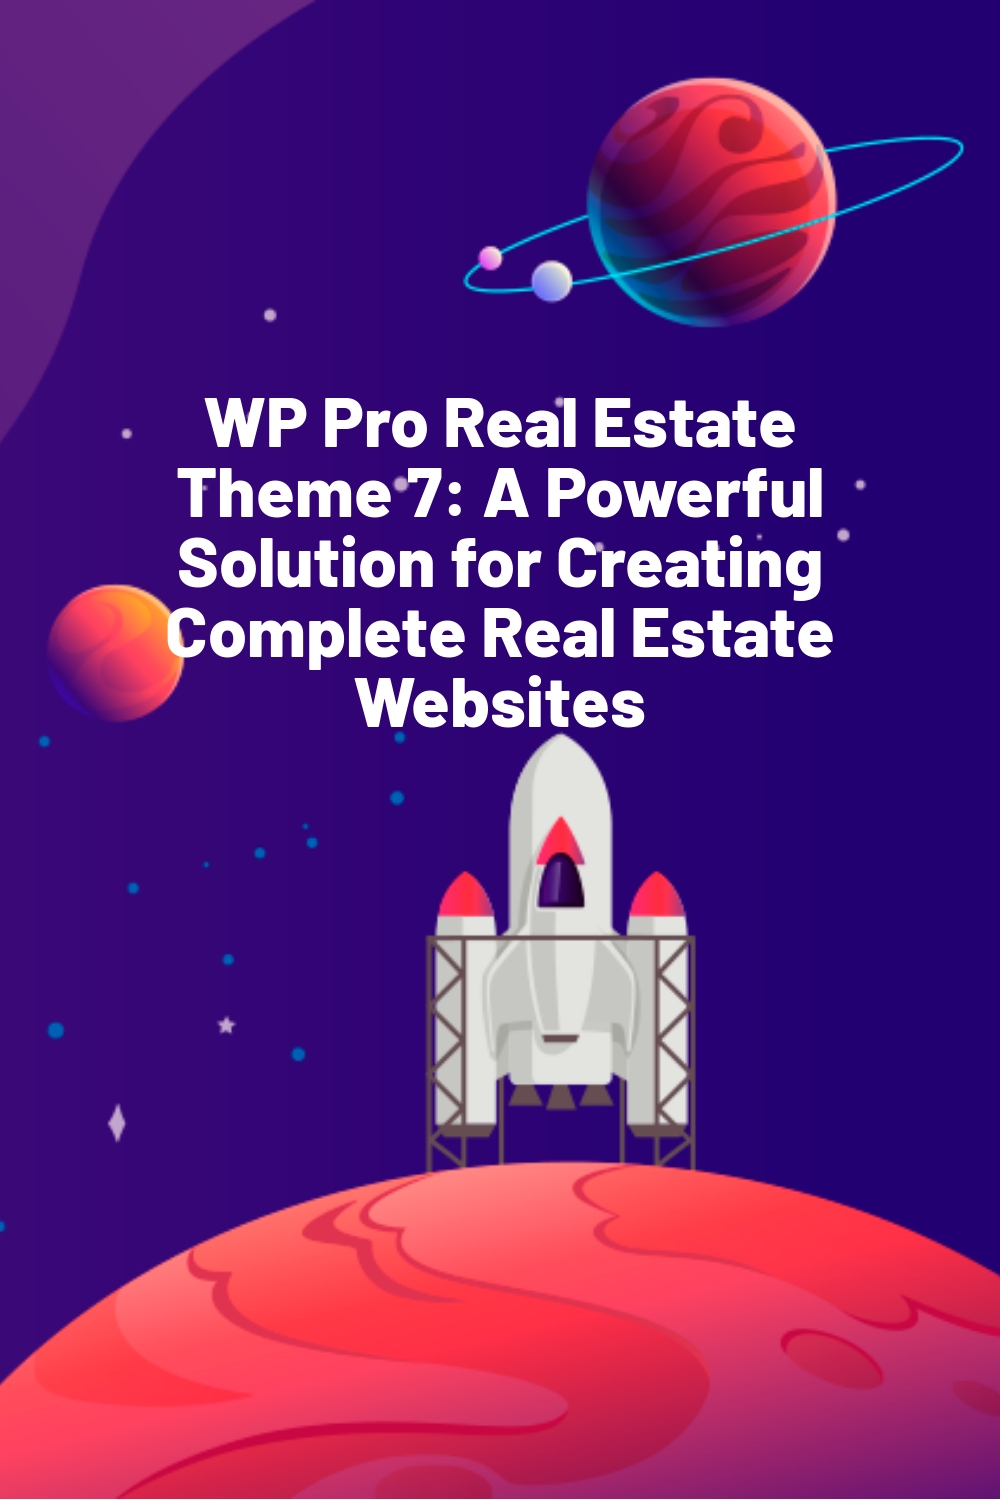 WP Pro Real Estate Theme 7: A Powerful Solution for Creating Complete Real Estate Websites